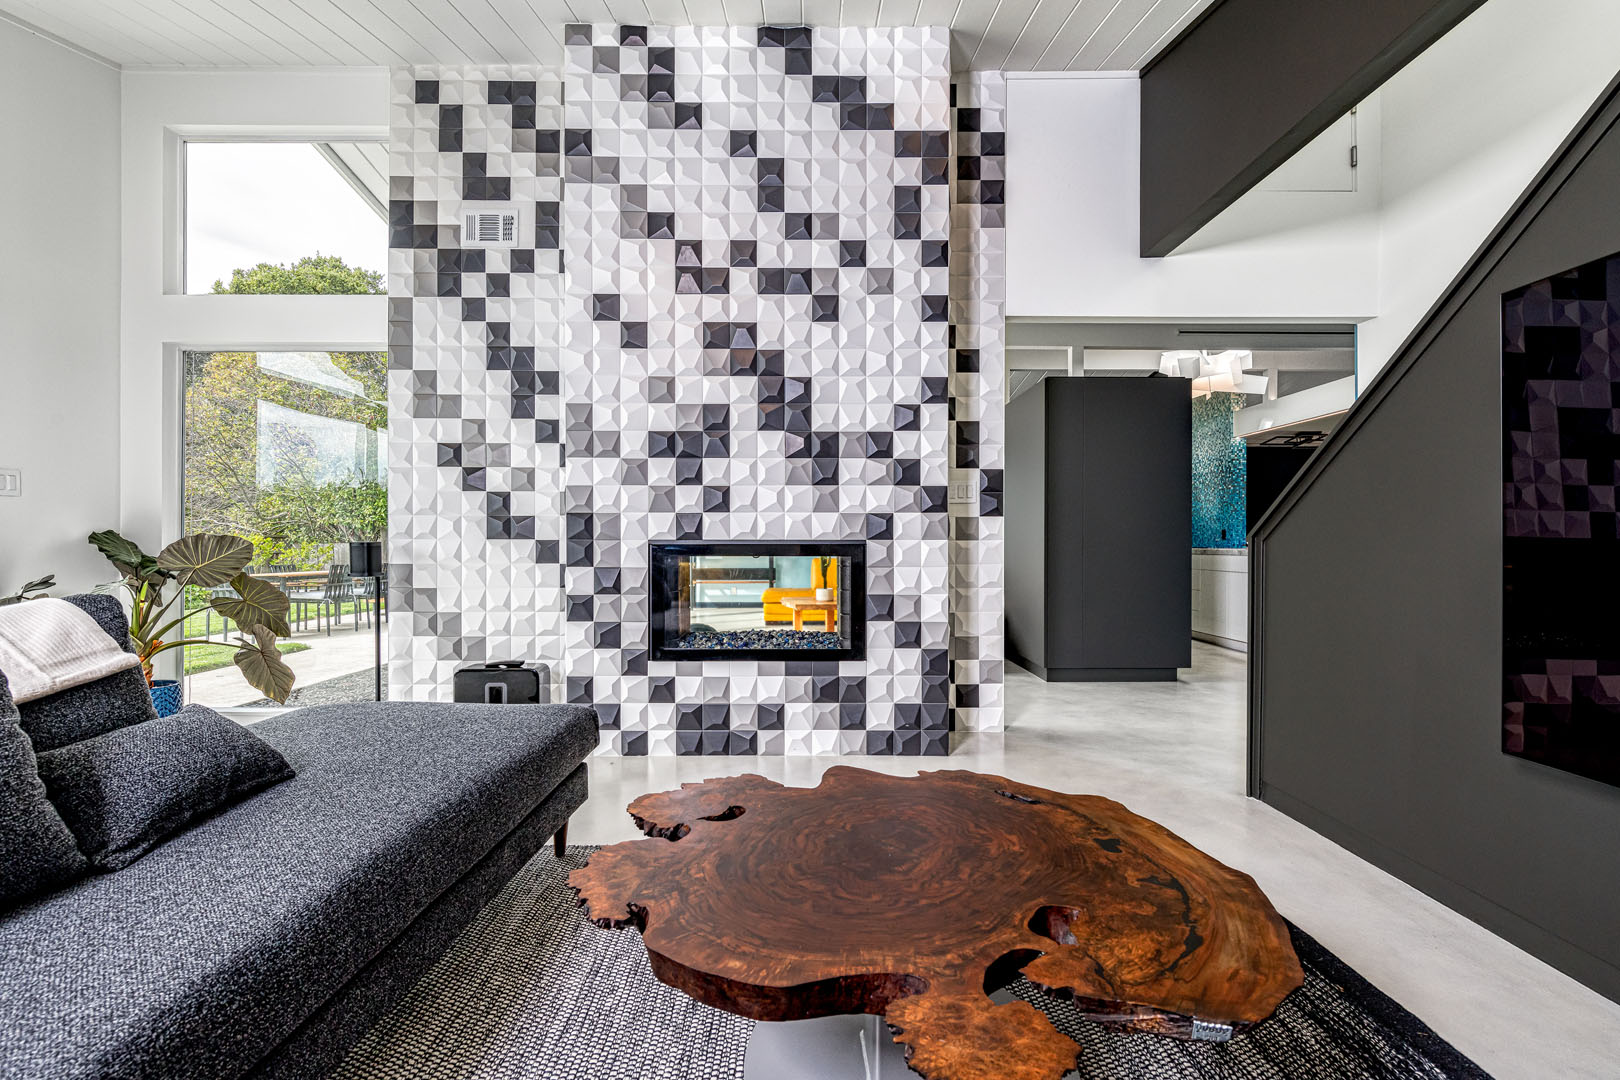 DRACO Design and Construction A living room with a fireplace and tiled walls.